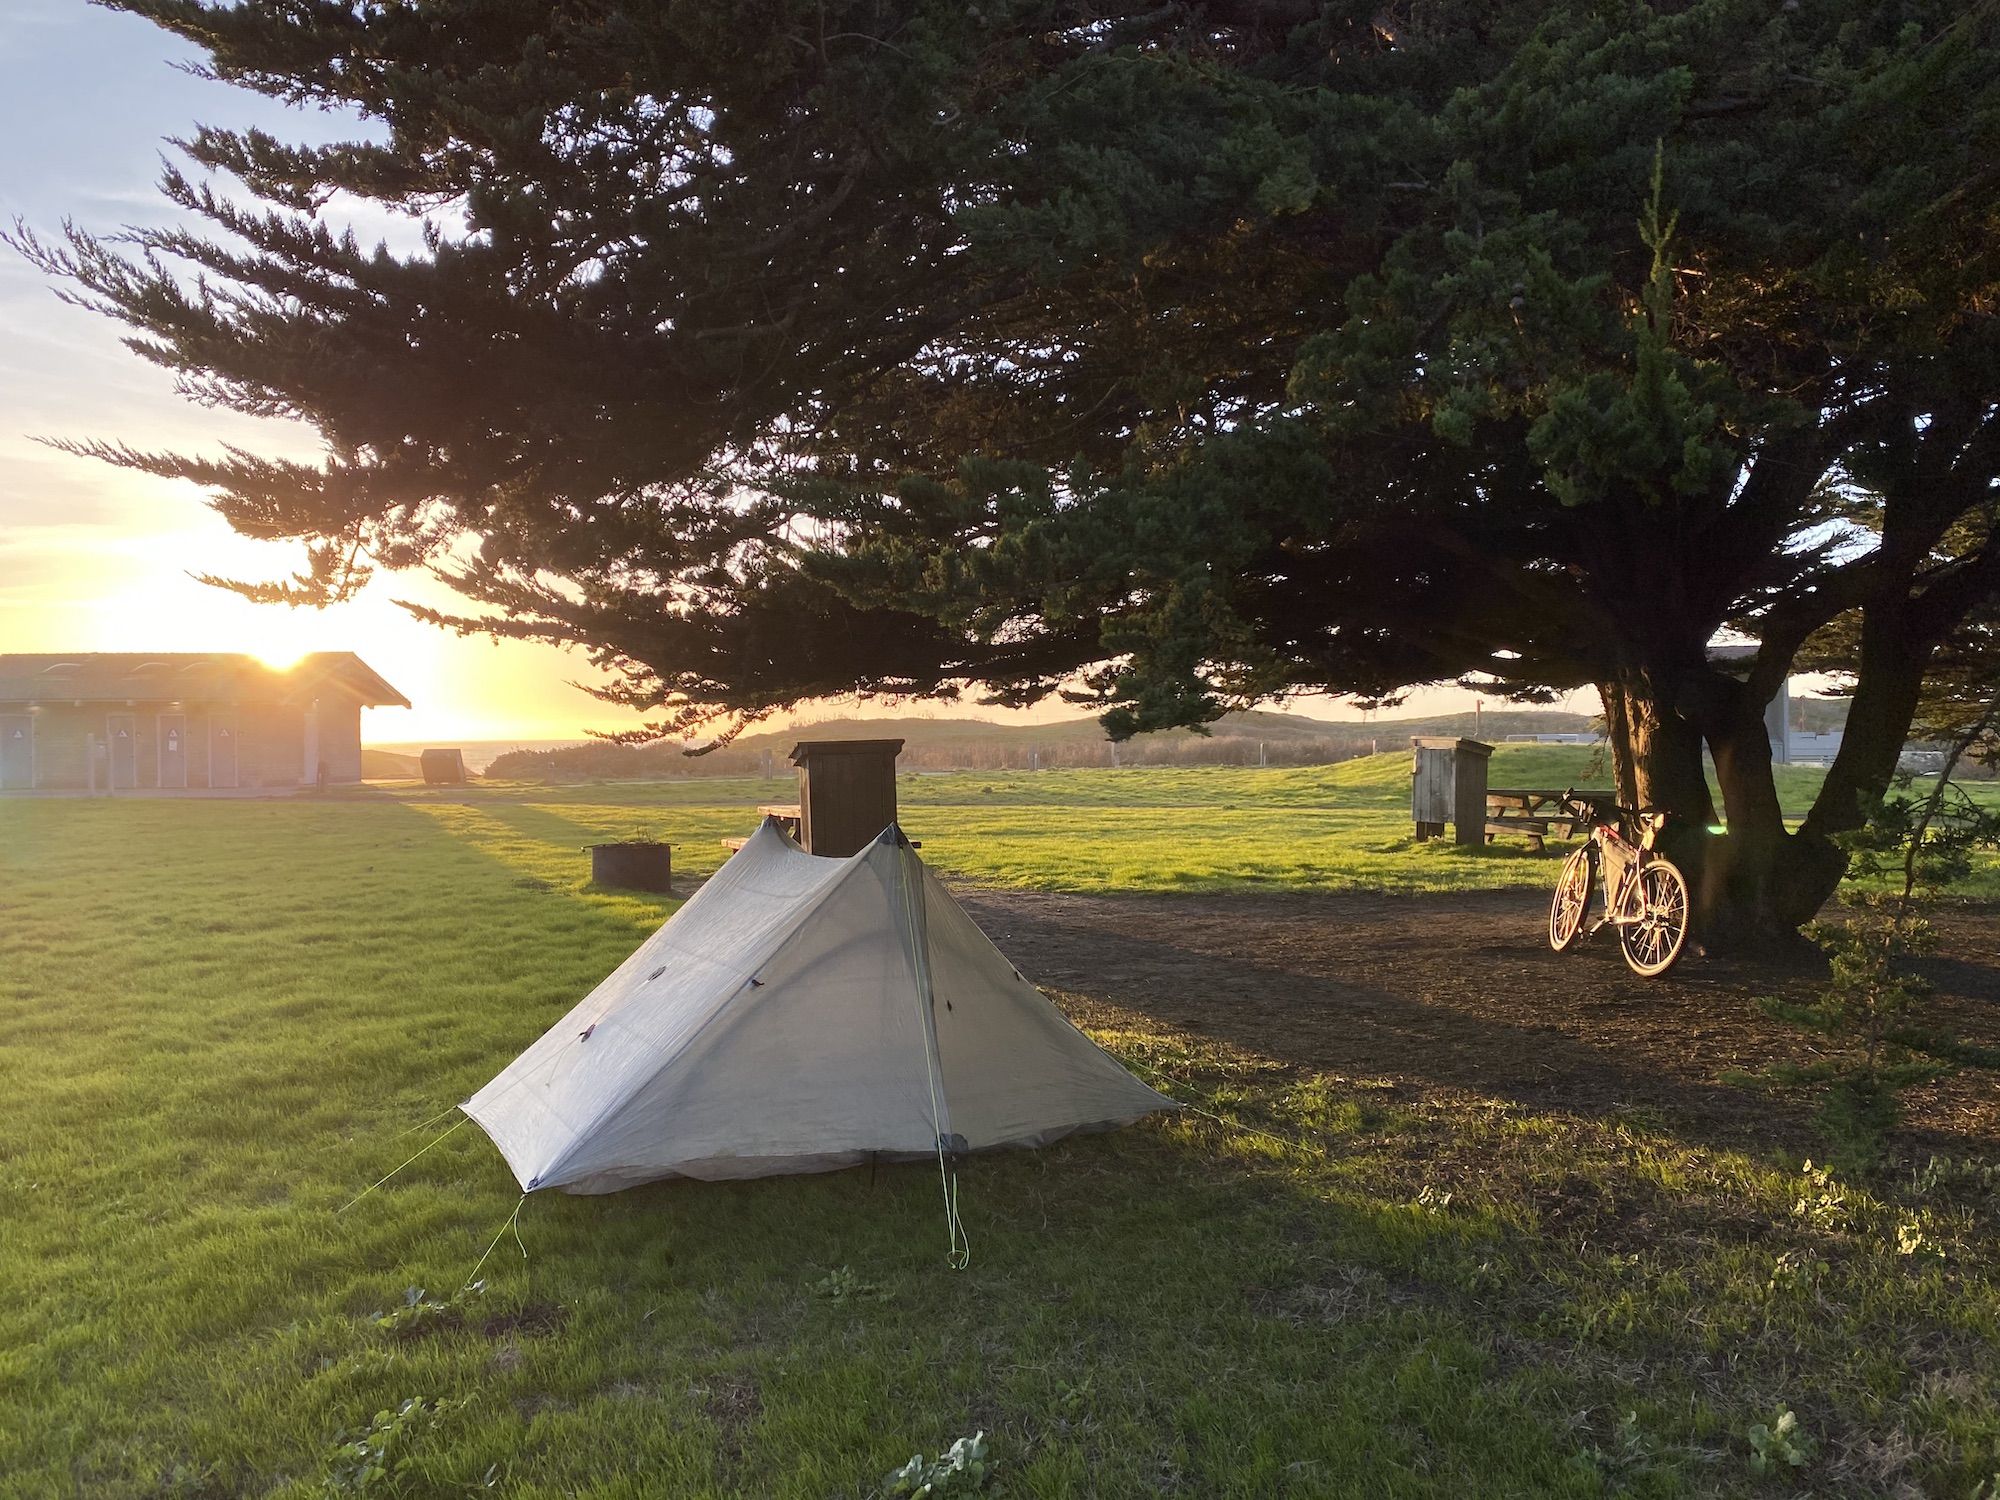 A tent set up under a large tree. A bike leaning on the tree.